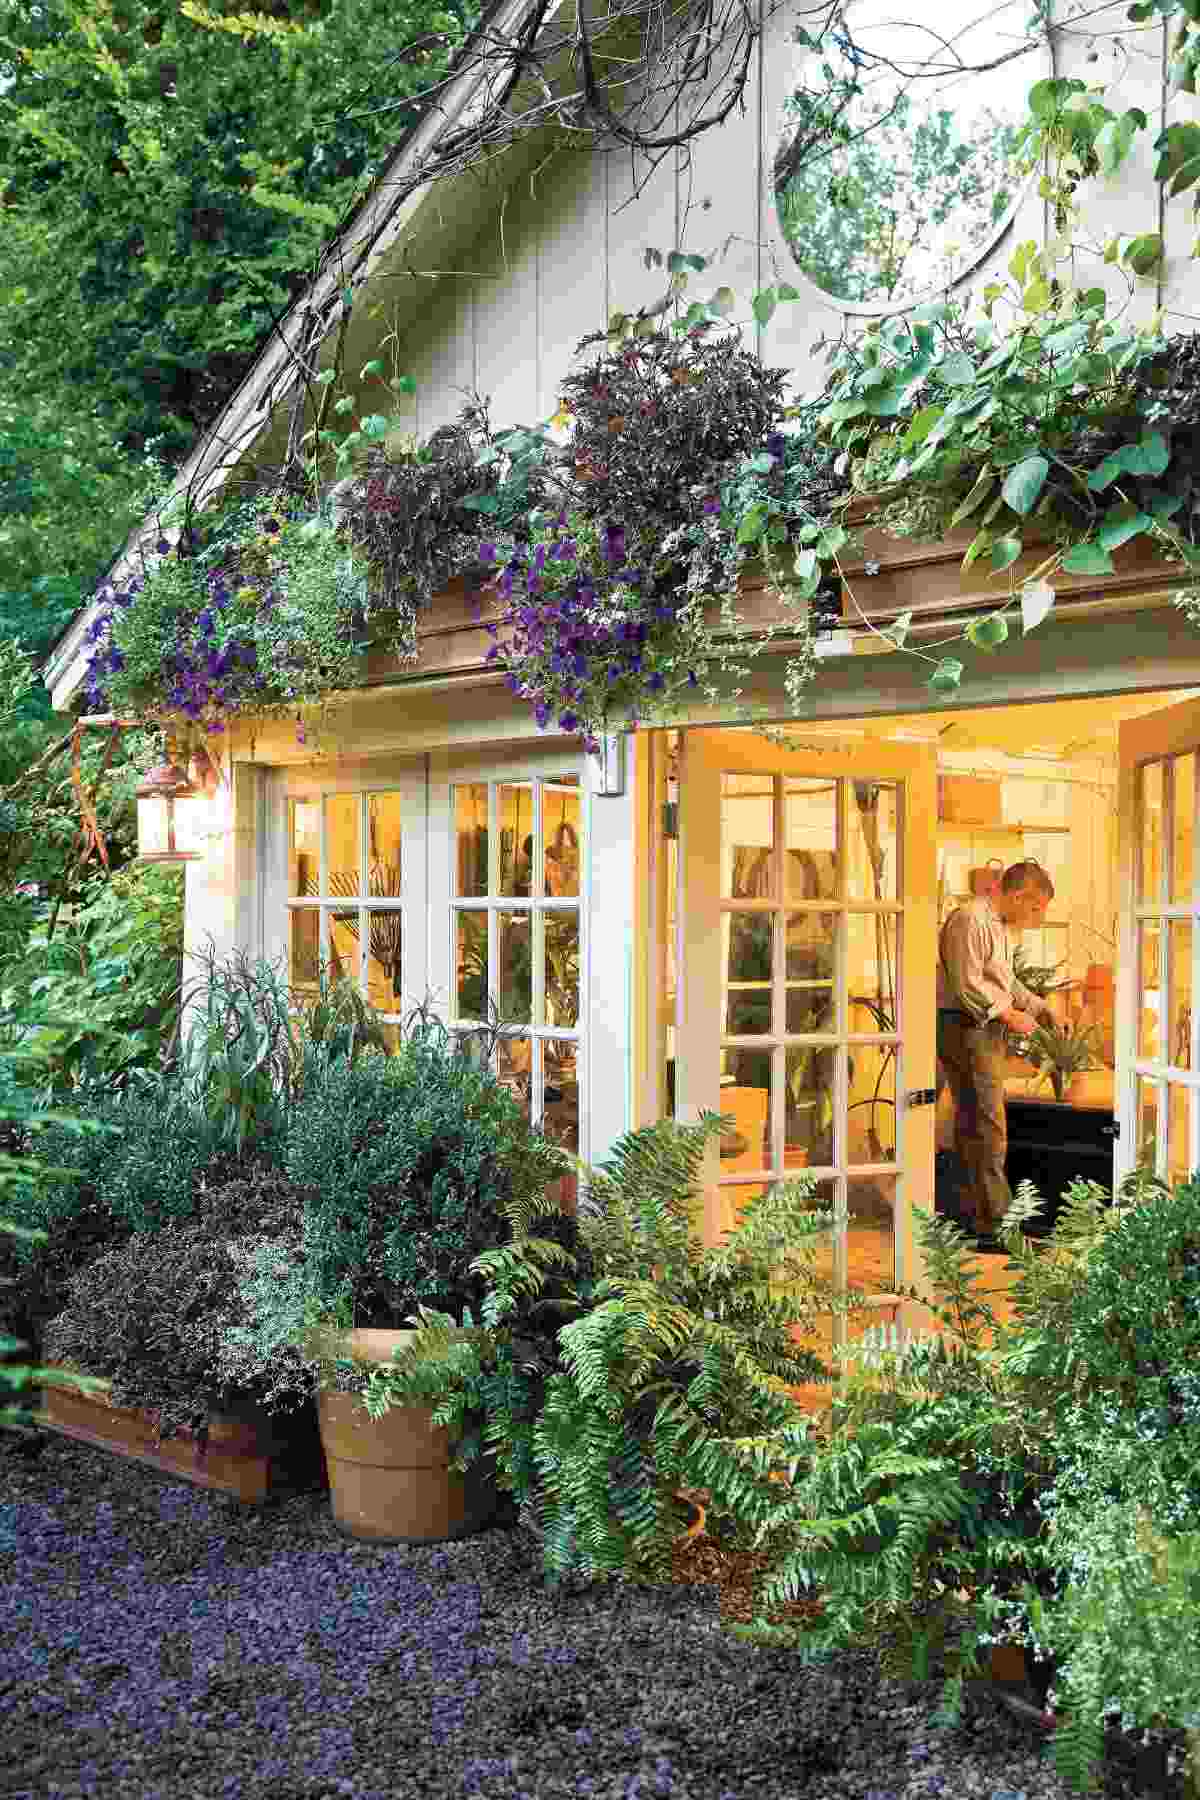 blend outdoor structures in the garden with hanging plants